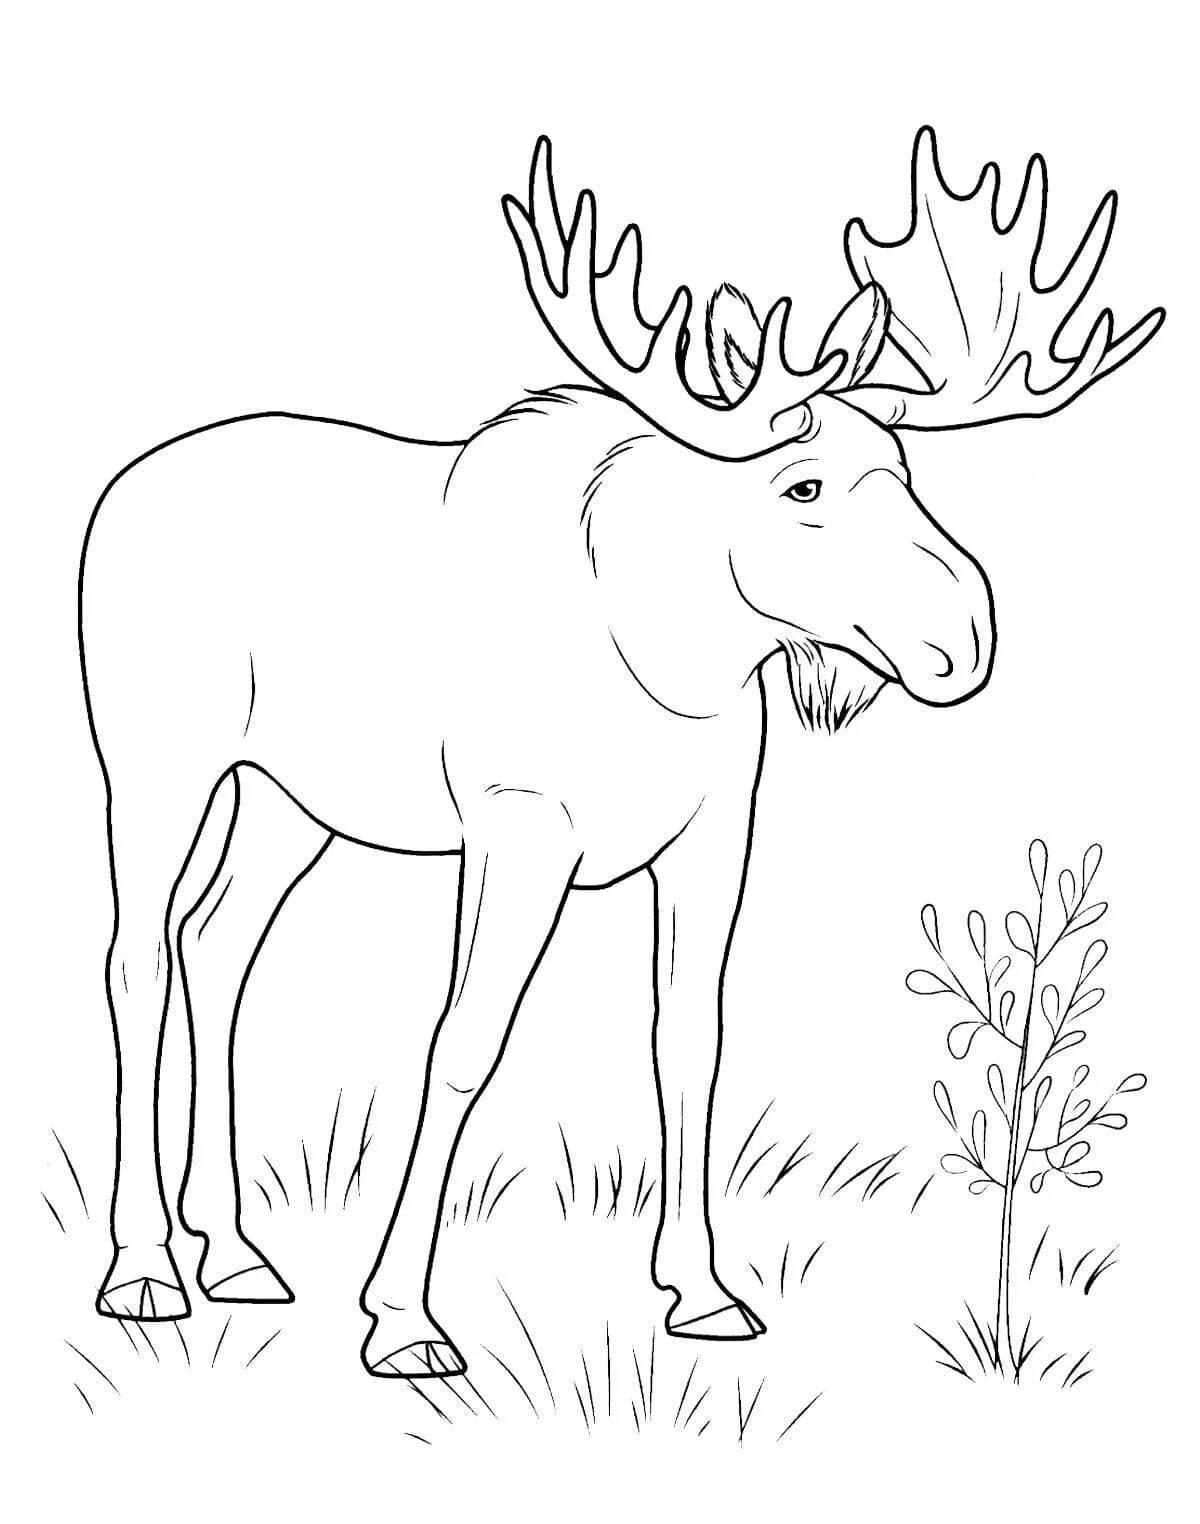 Magic forest animals coloring page for kids